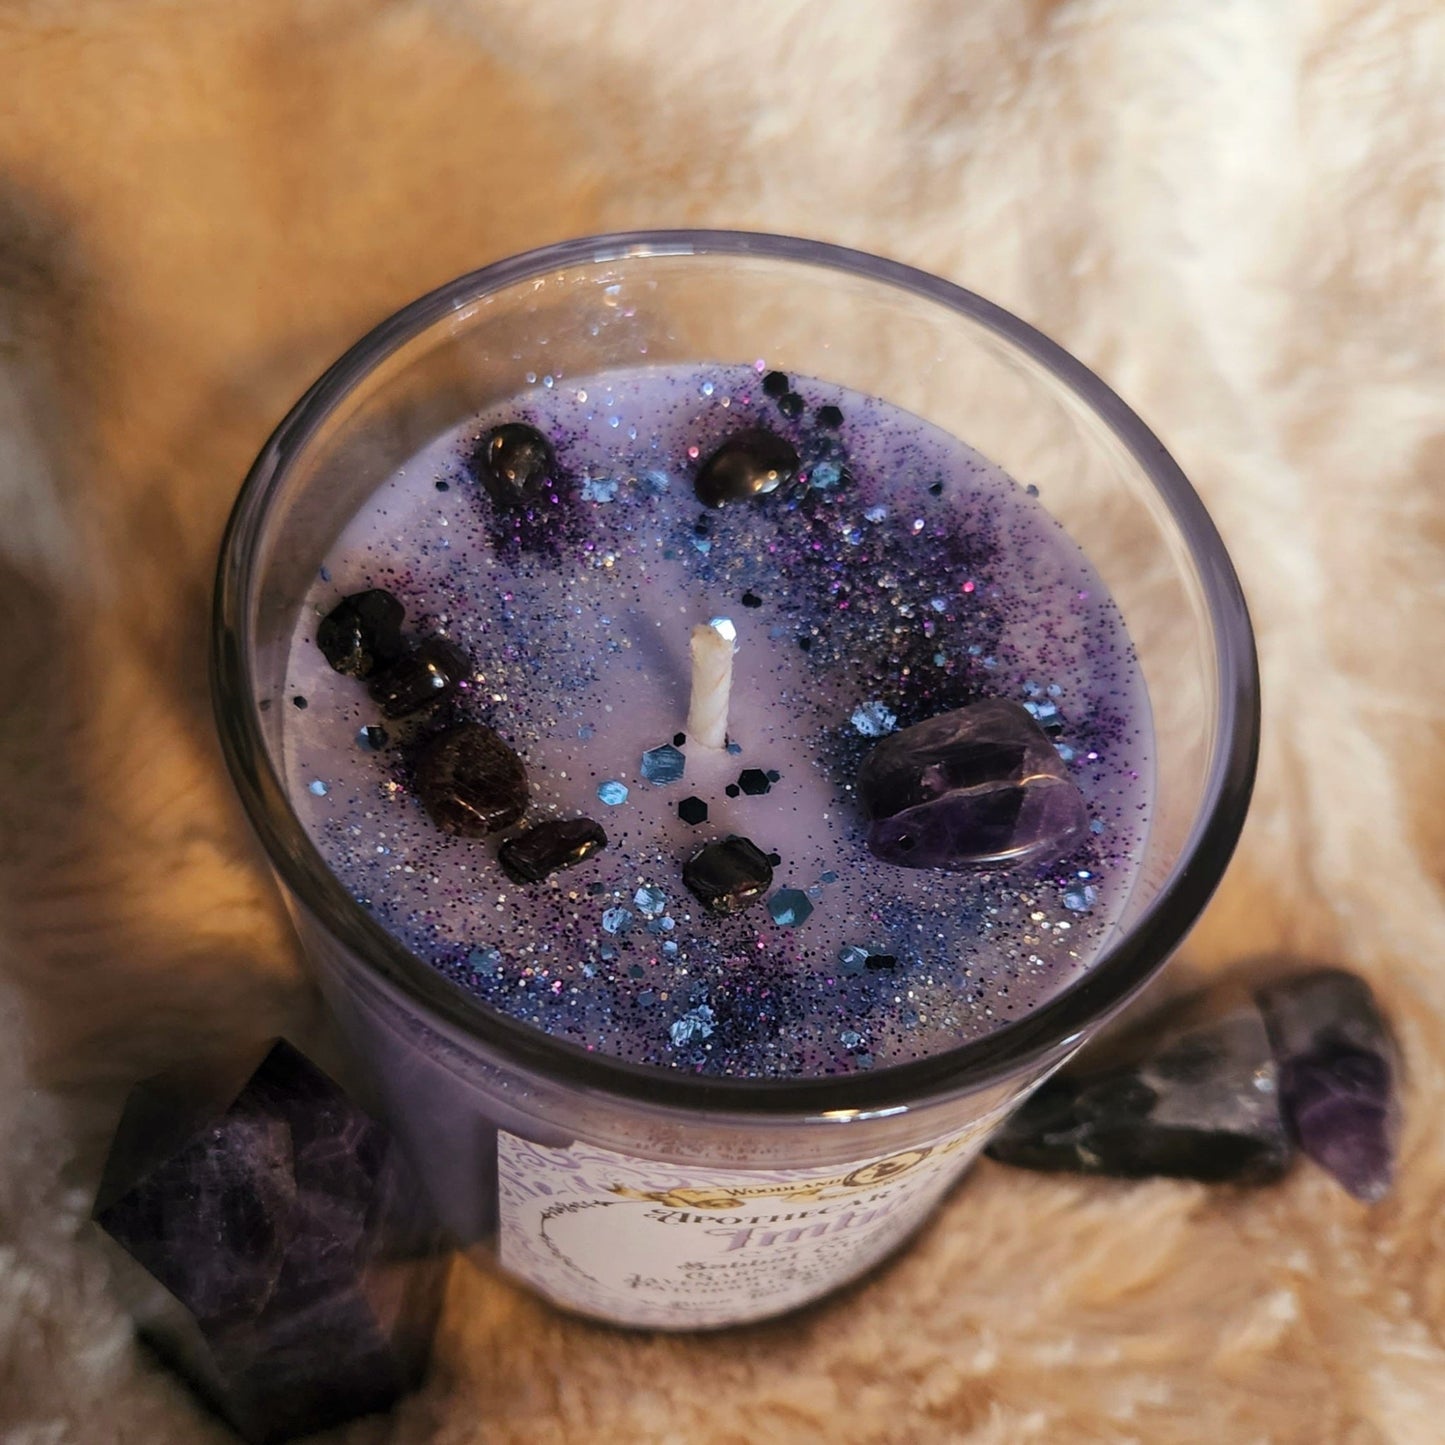 Imbolc Ritual candle top view with amethyst crystals